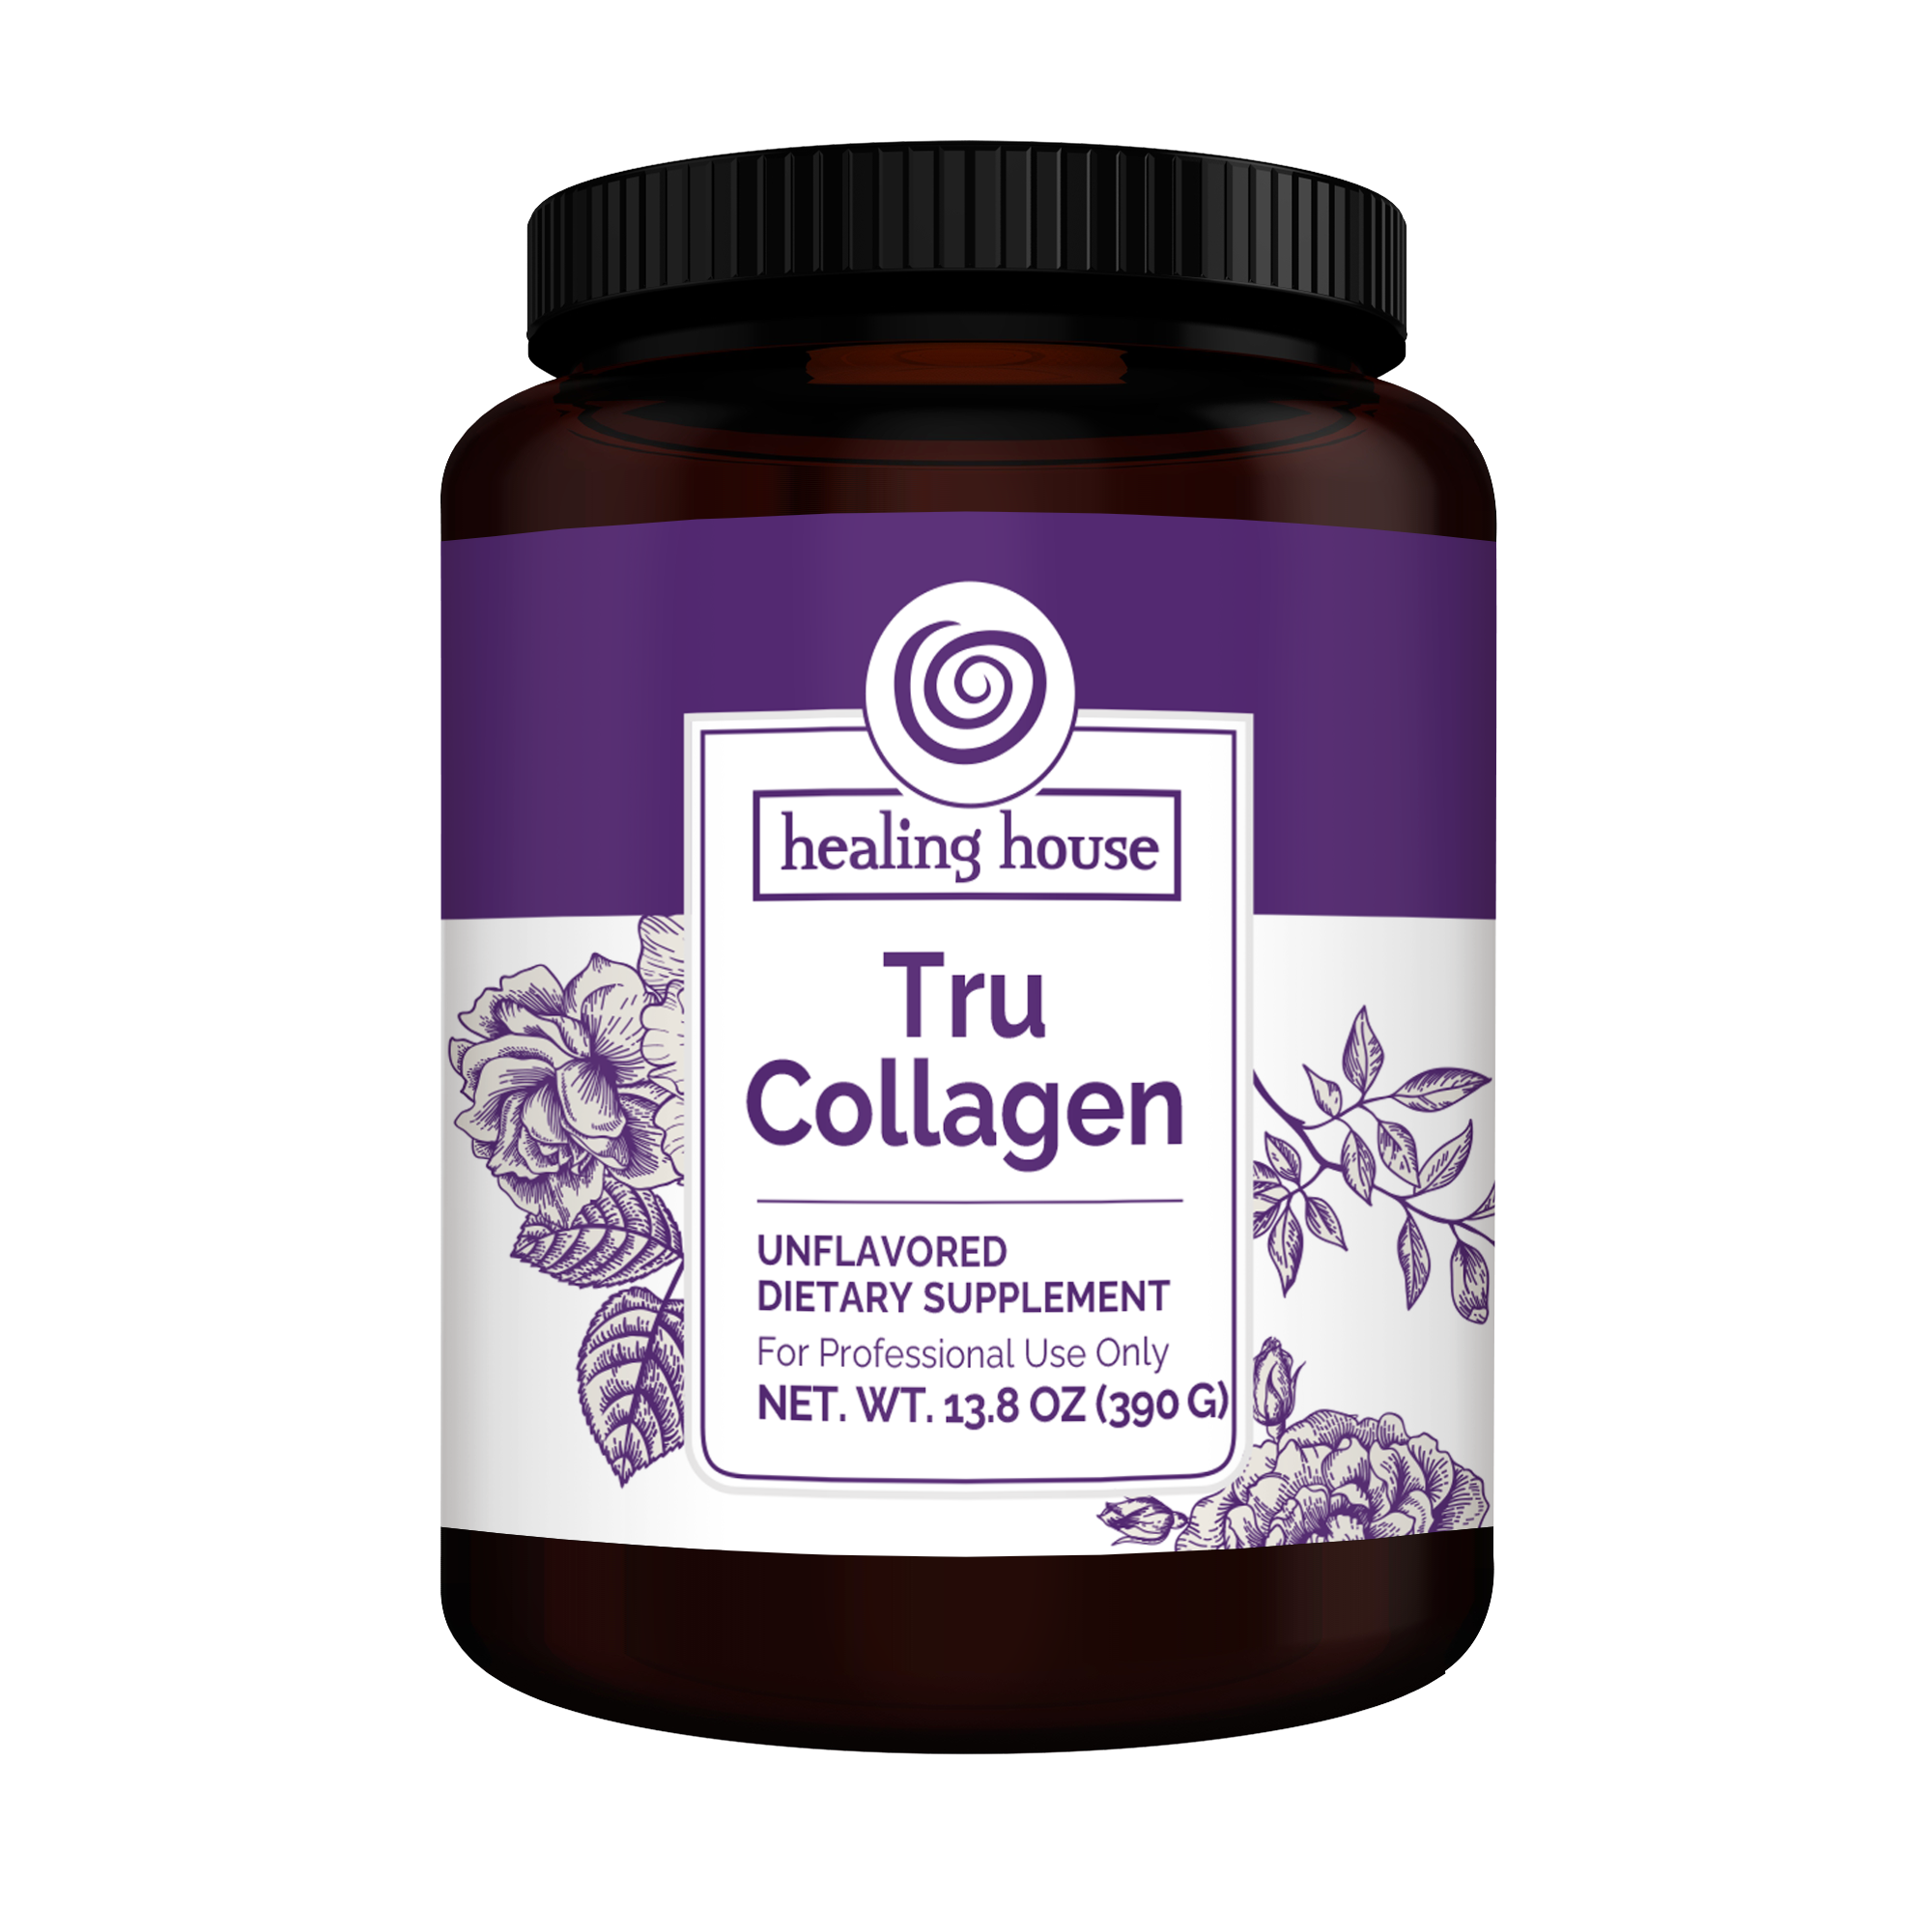 Tru Collagen product container front